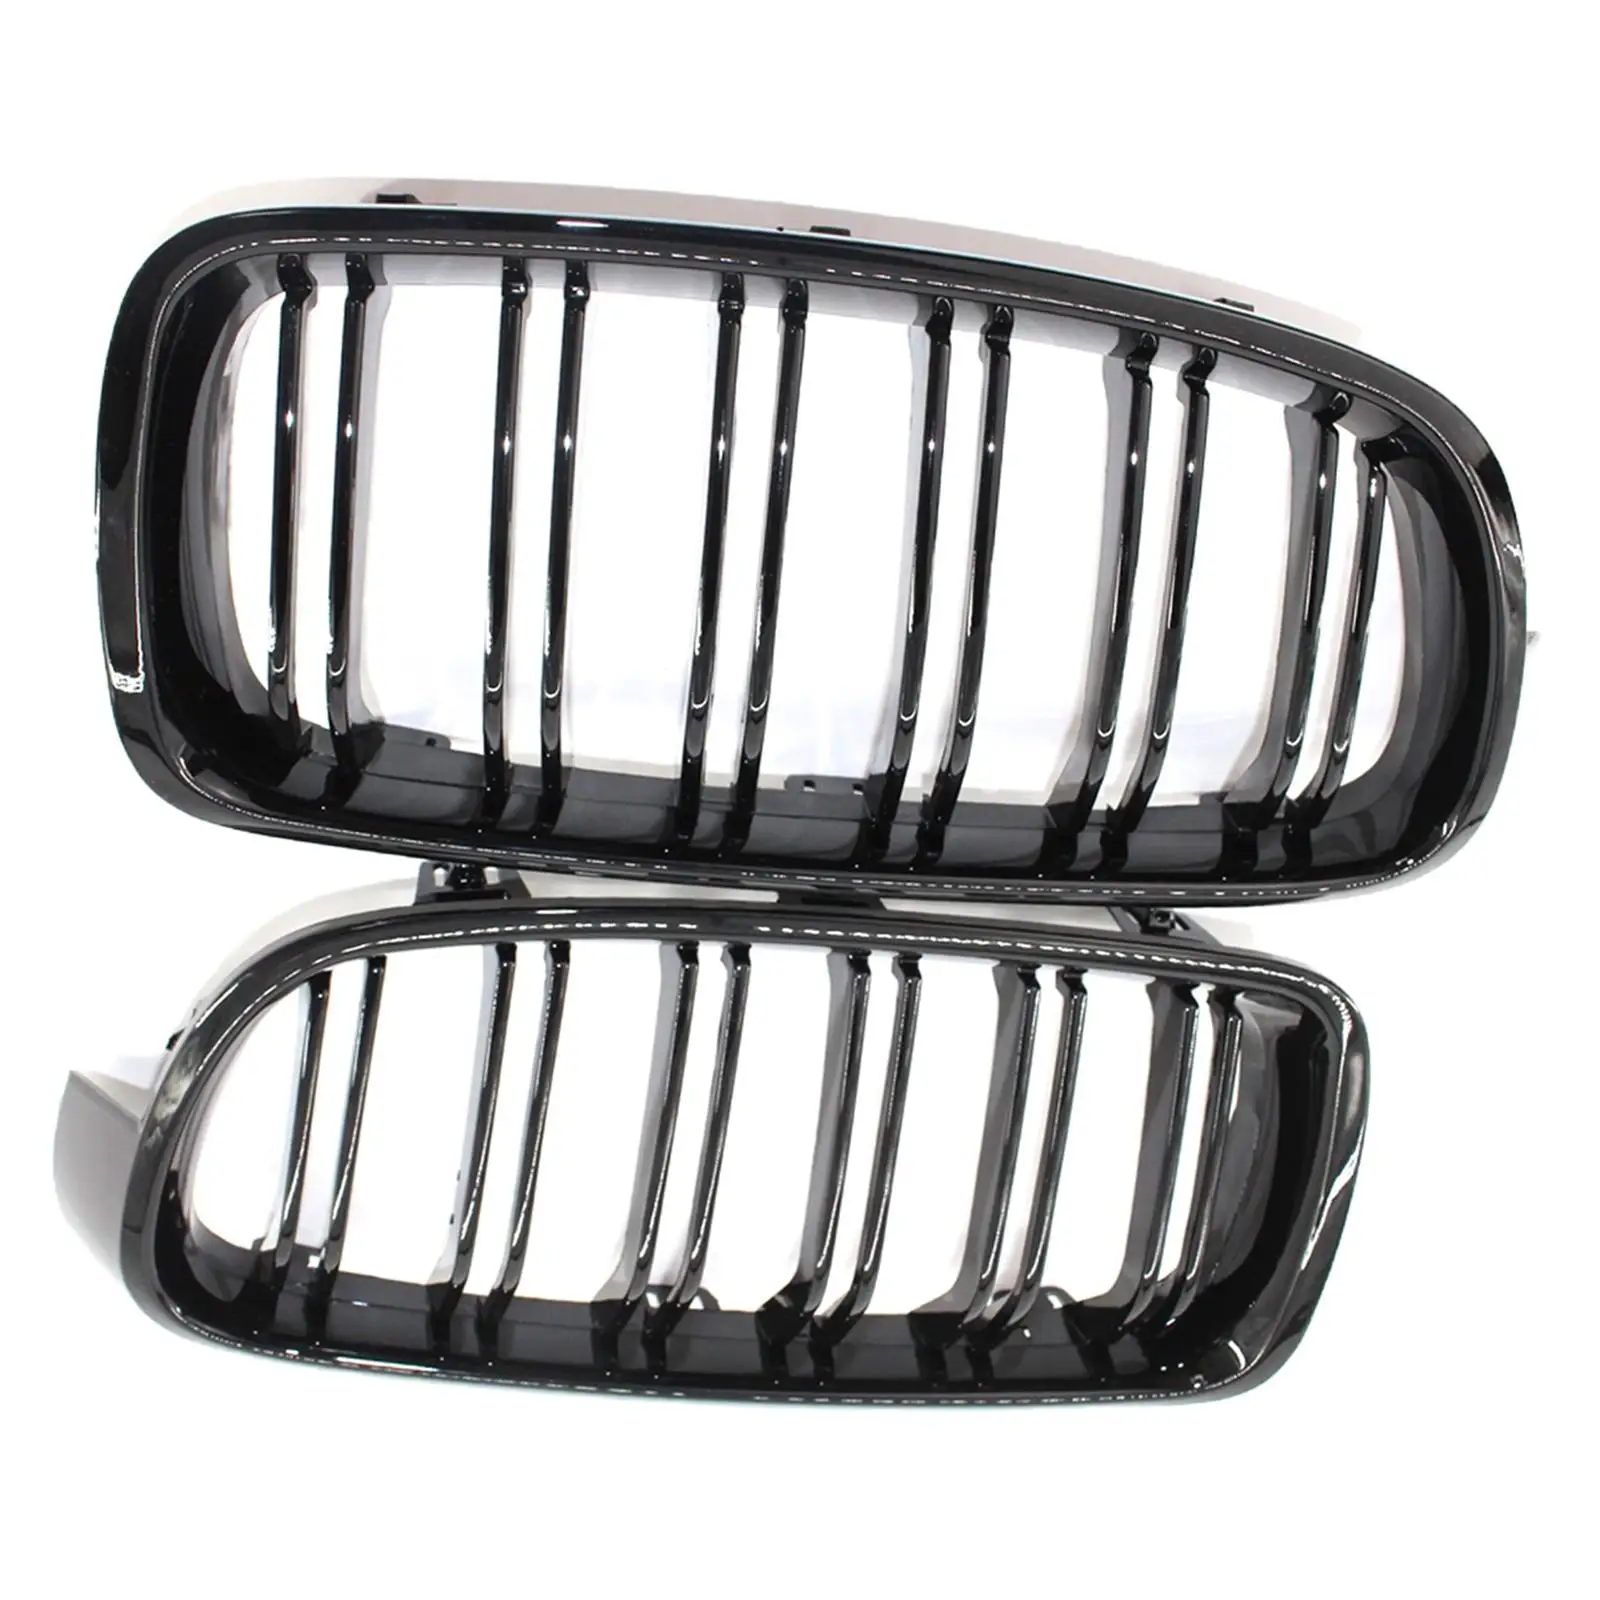 2x Front Kidney Grille Grill 51130054493 51130054494 for 3 F30 F31 F35